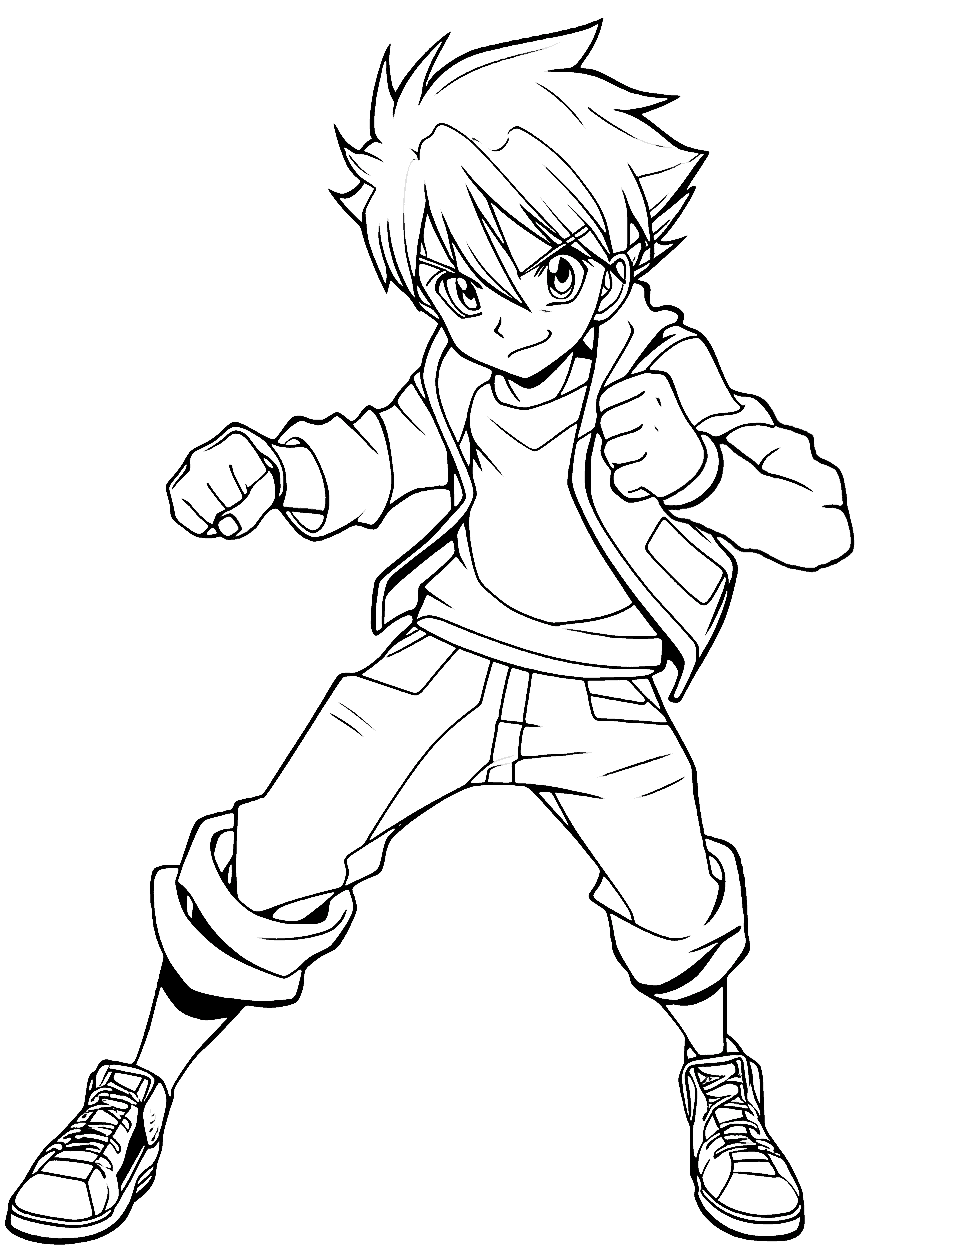 Detailed Anime Boy Coloring Page - A detailed anime boy in a dynamic pose, perfect for older kids who want a challenge.